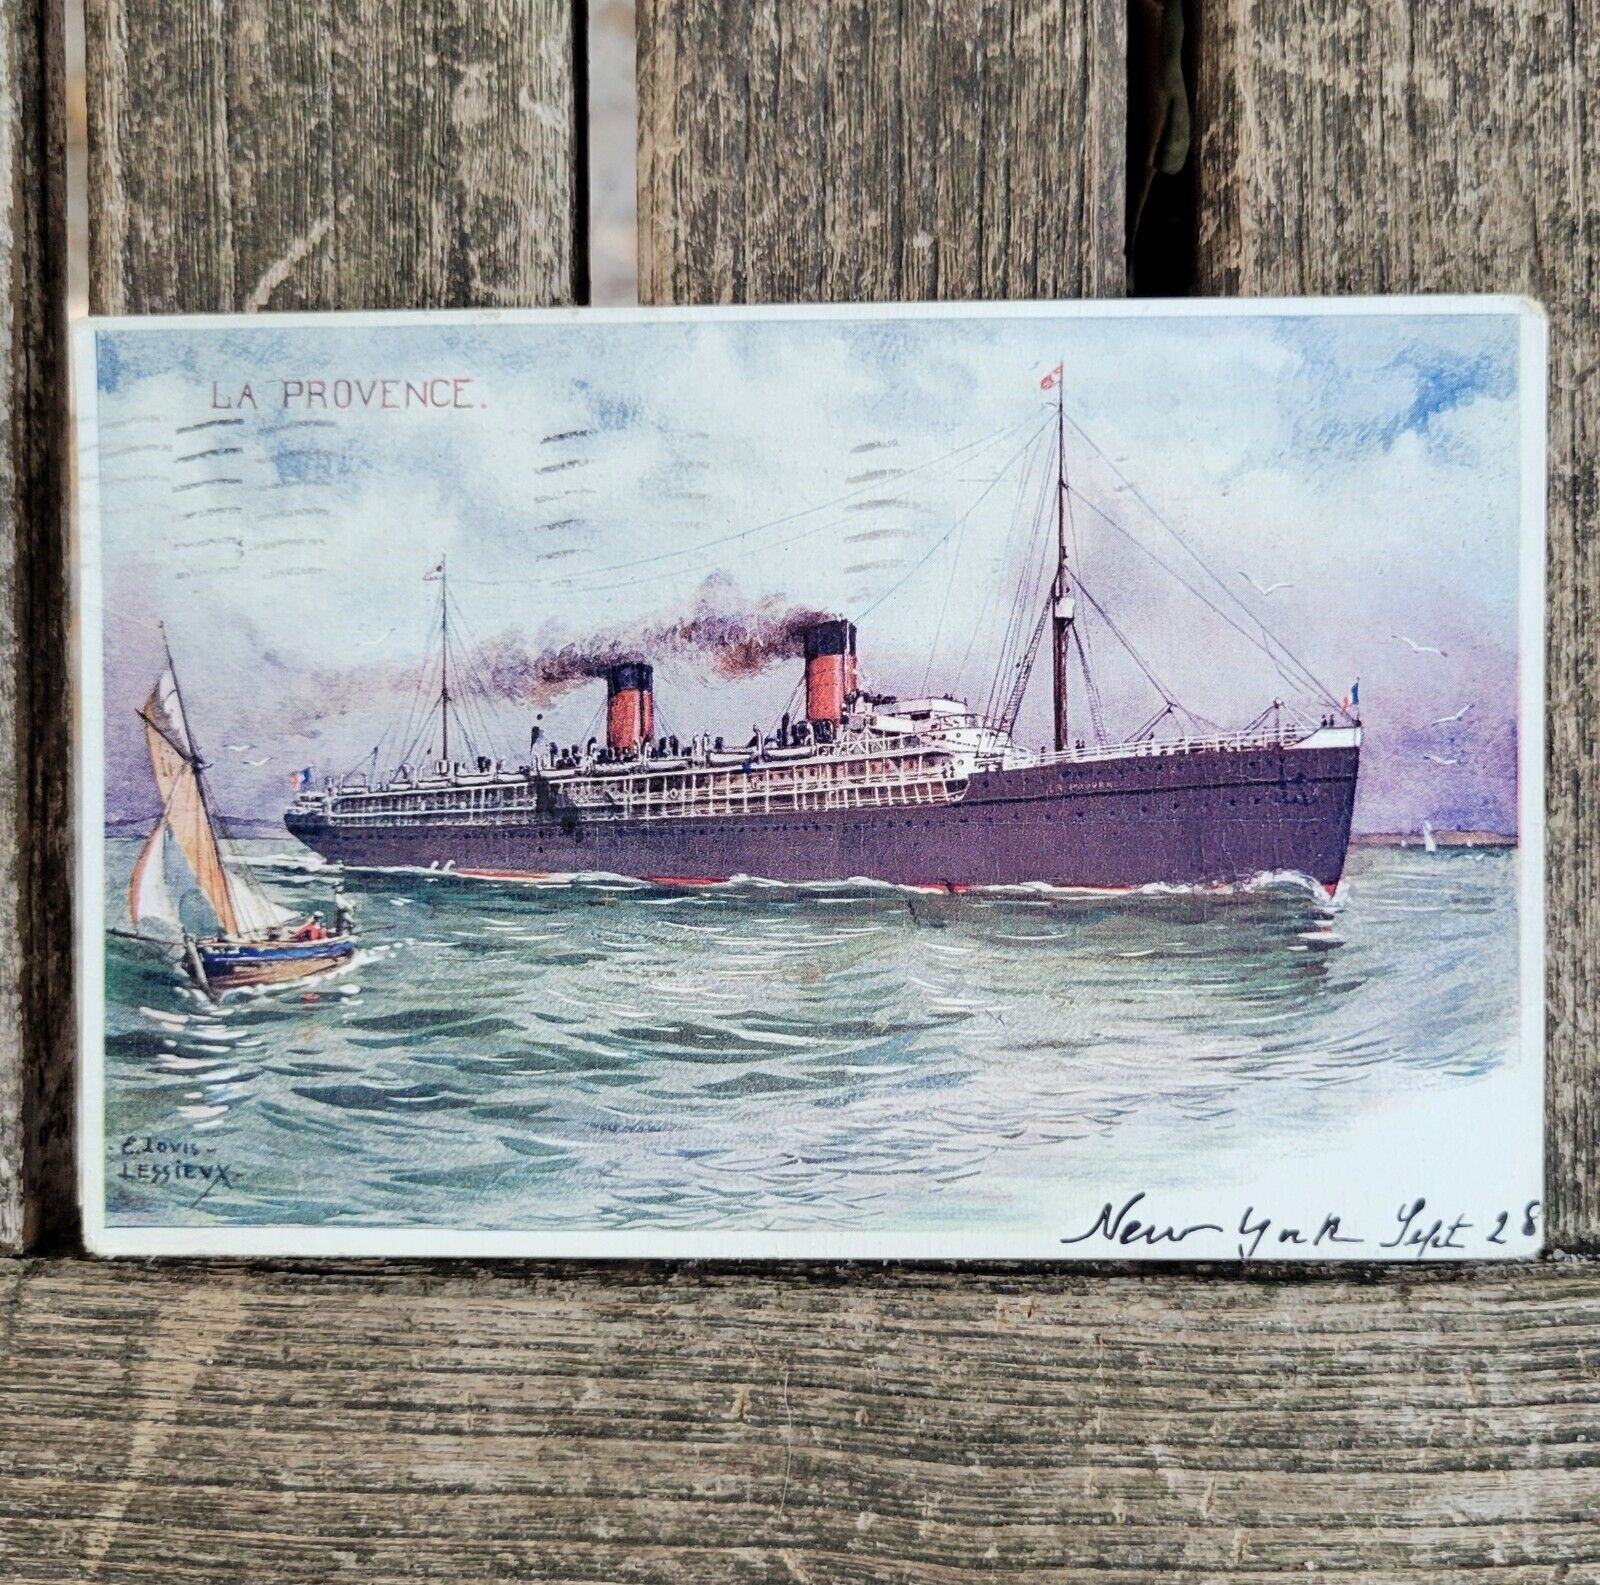 1906 La Provence French Line SS Steamship Postcard N Y Arrival Sept 28th